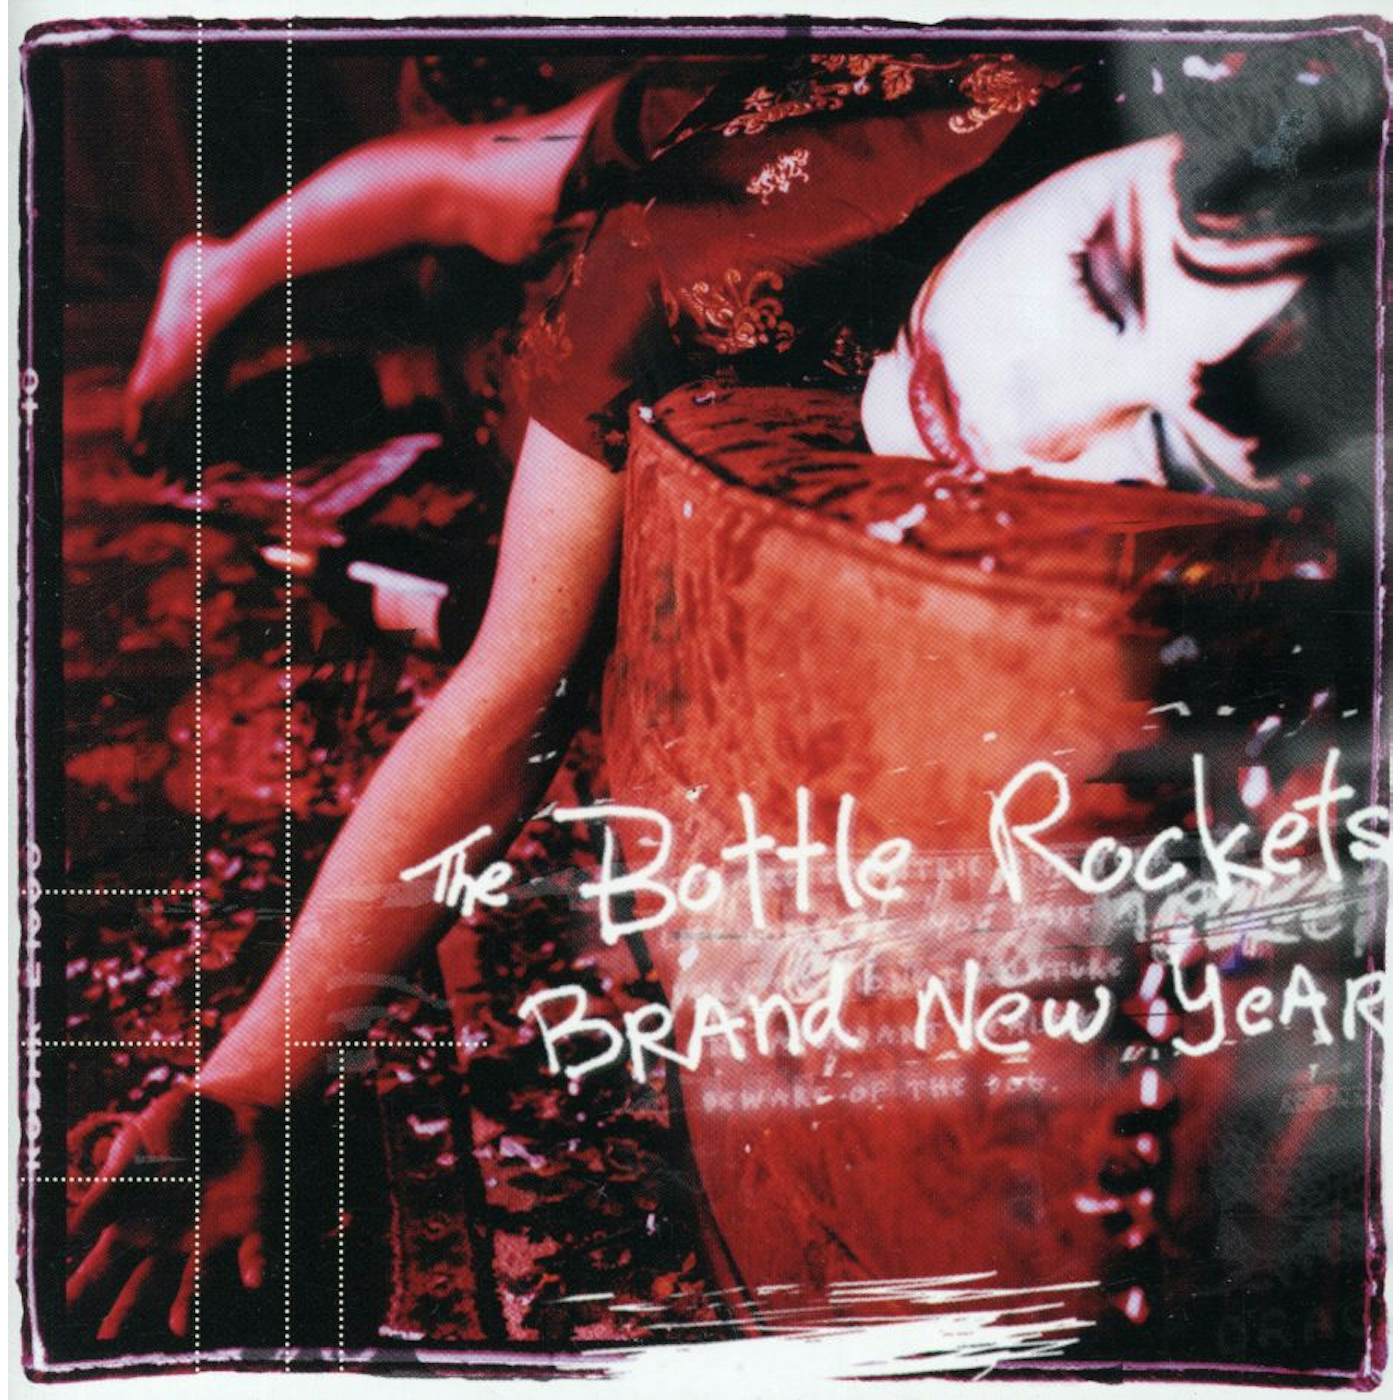 The Bottle Rockets BRAND NEW YEAR CD